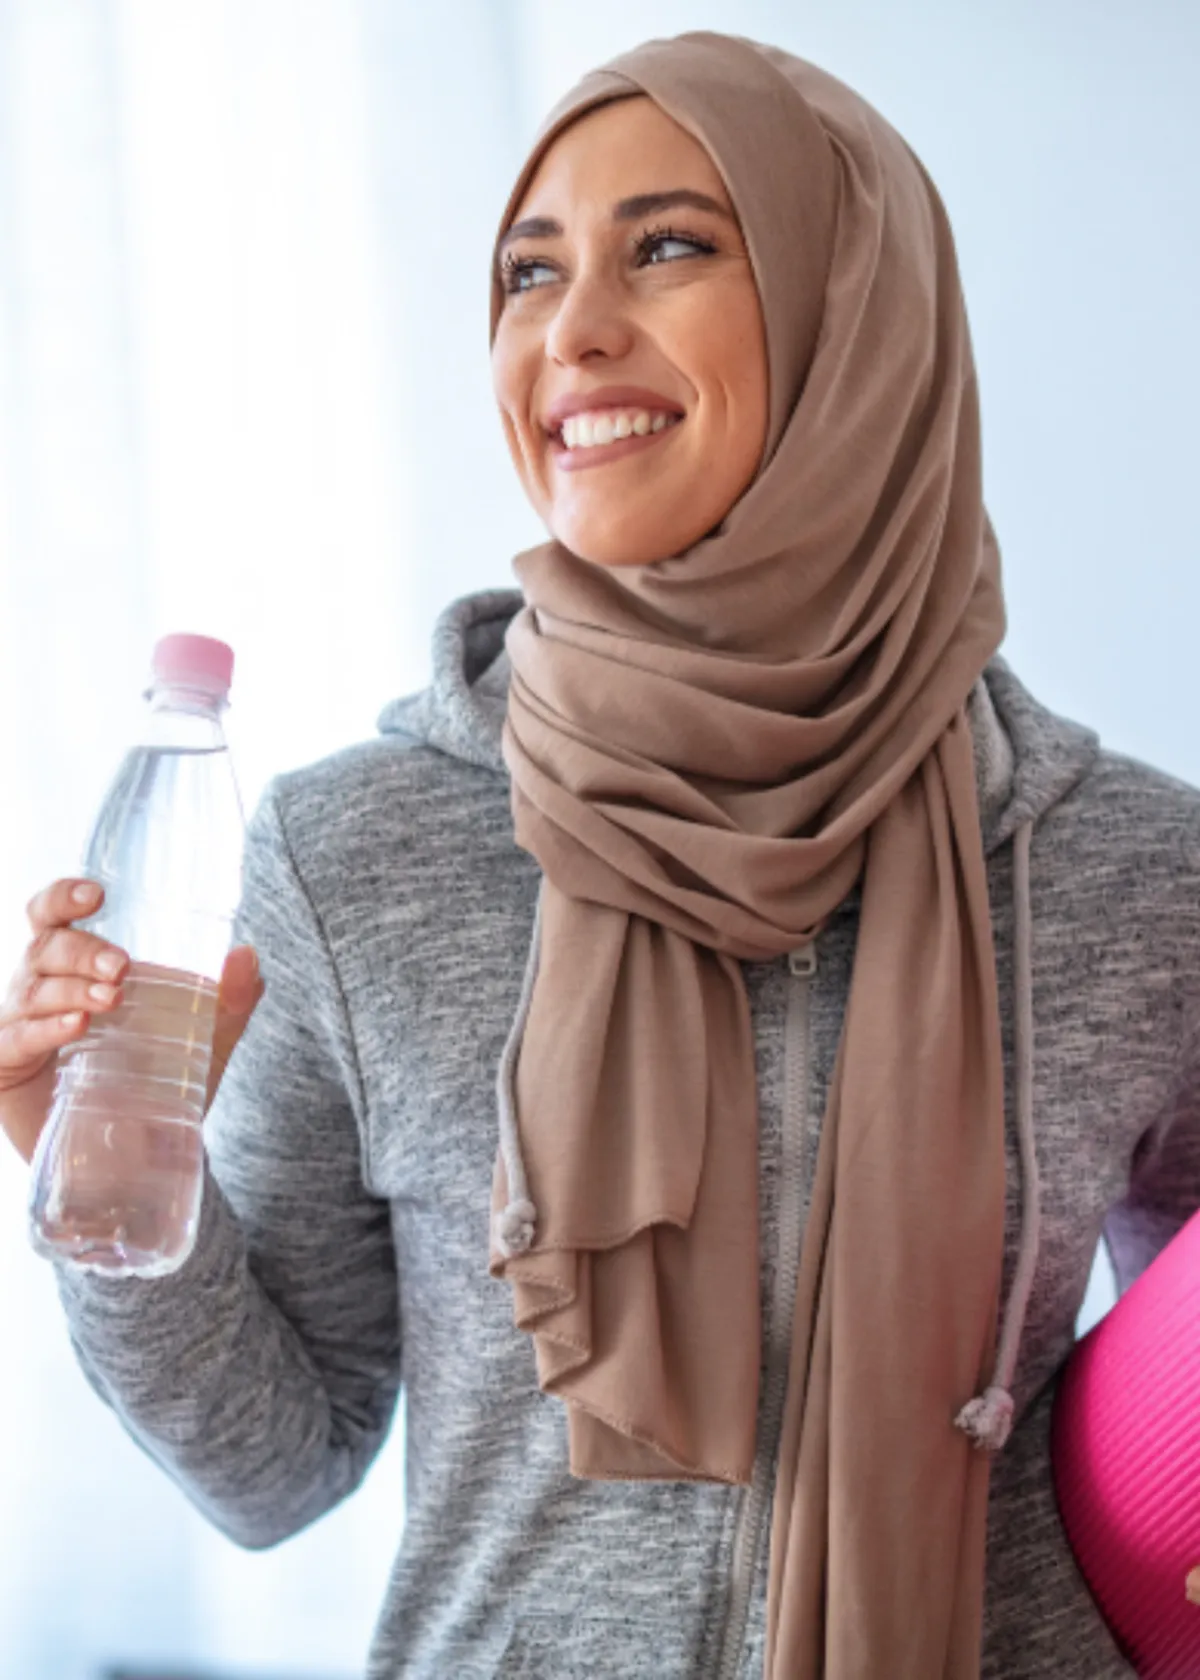 A smiling woman in a hijab holding a water bottle and a yoga mat ready for a personal trainer certification